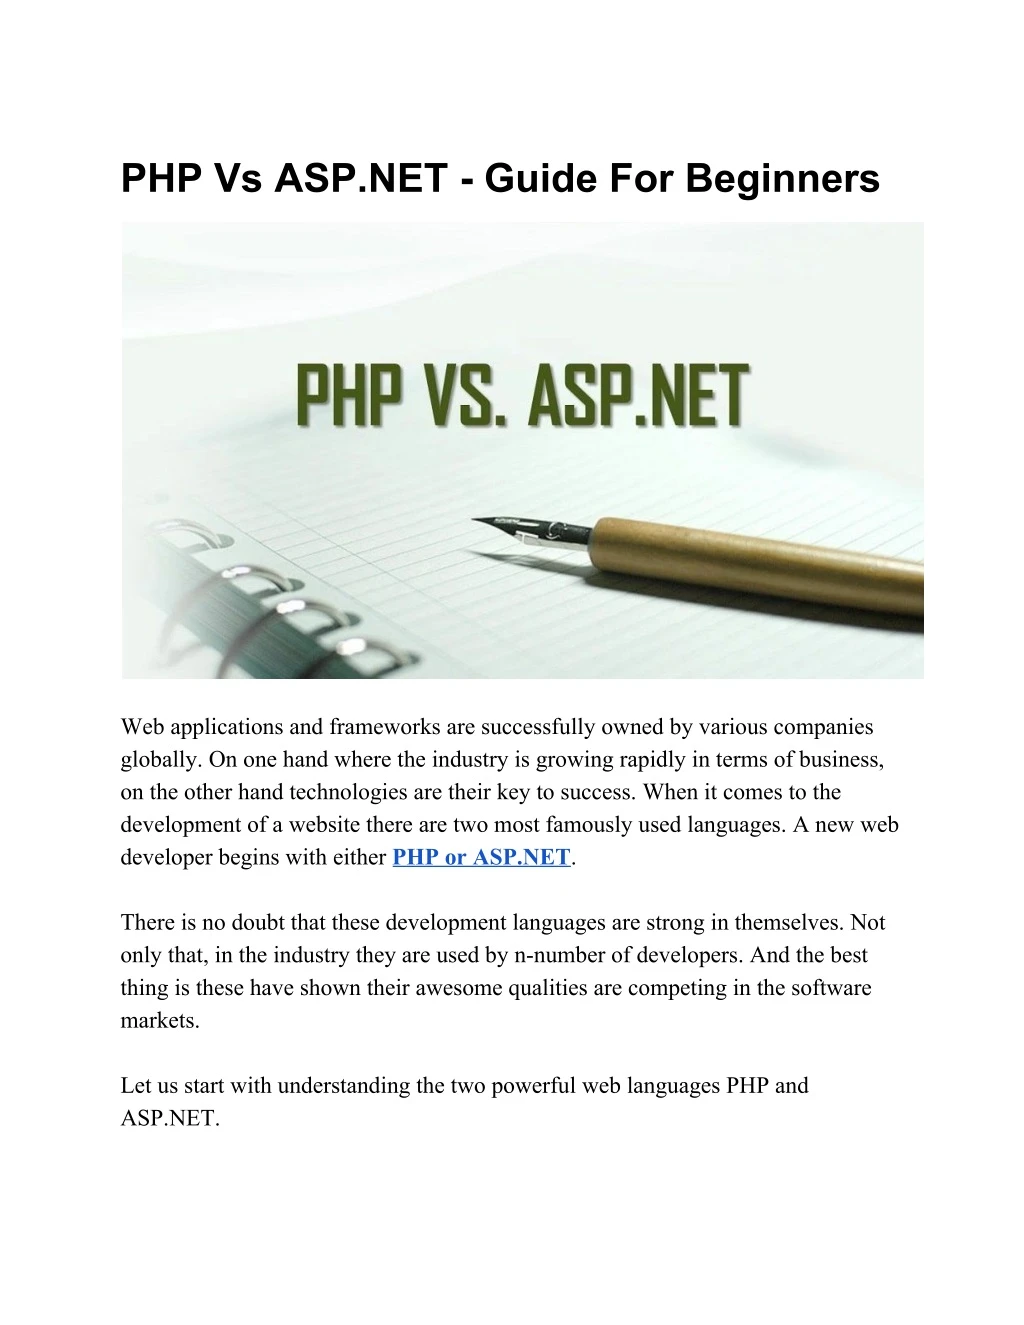 php vs asp net guide for beginners